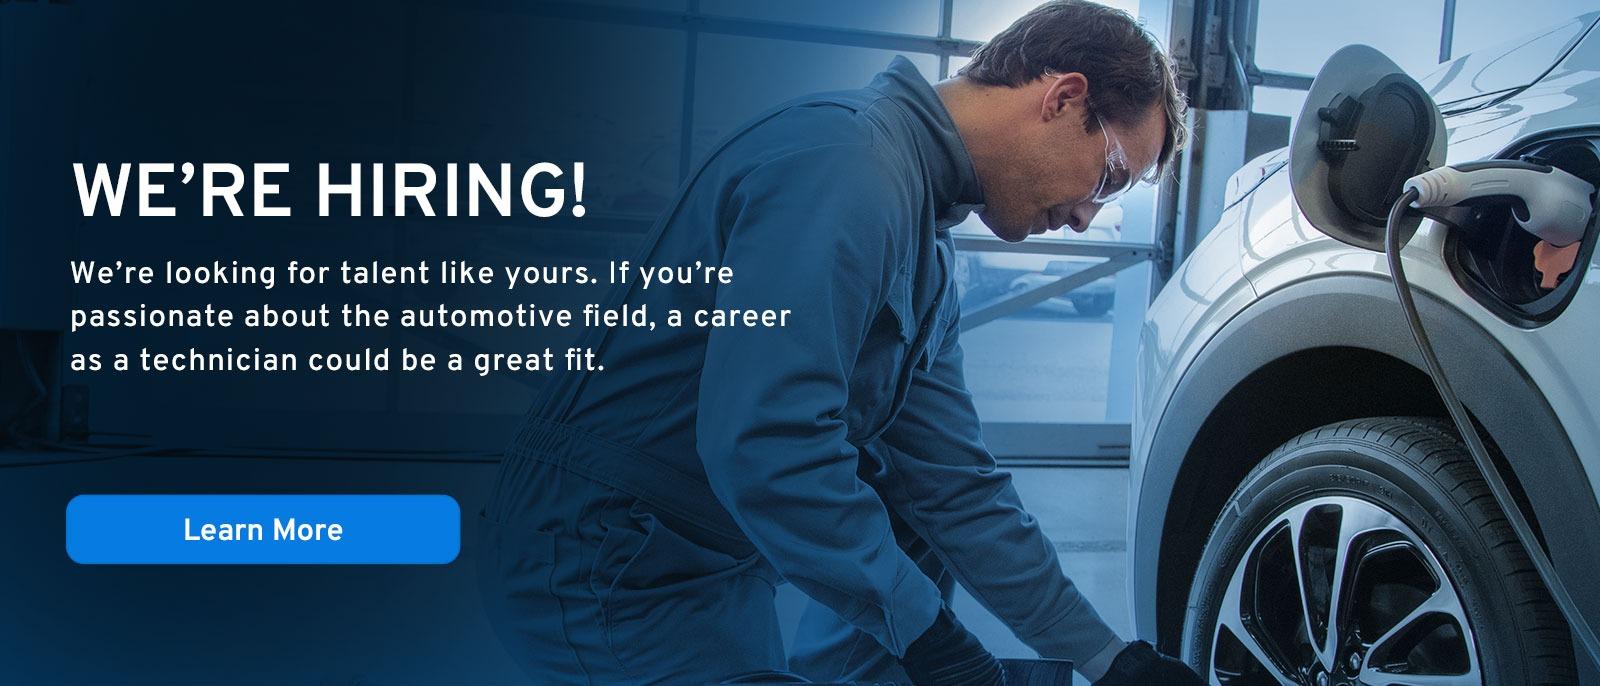 Our Service Team Is Hiring
GM CERTIFIED TECHNICIANS